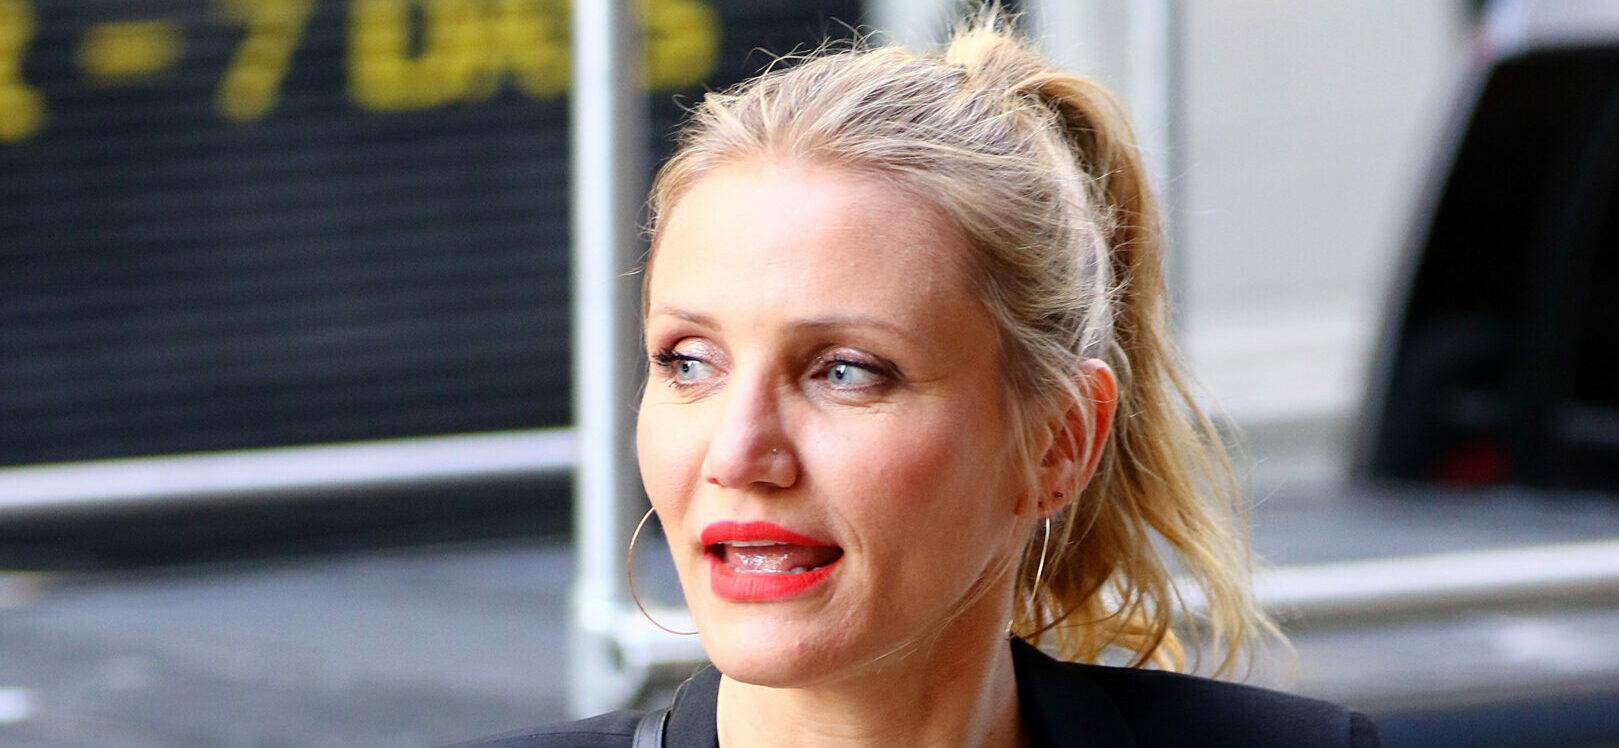 Cameron Diaz Resumes Filming ‘Back in Action’ With Jamie Foxx Body Doubles Amid His Hospitalization